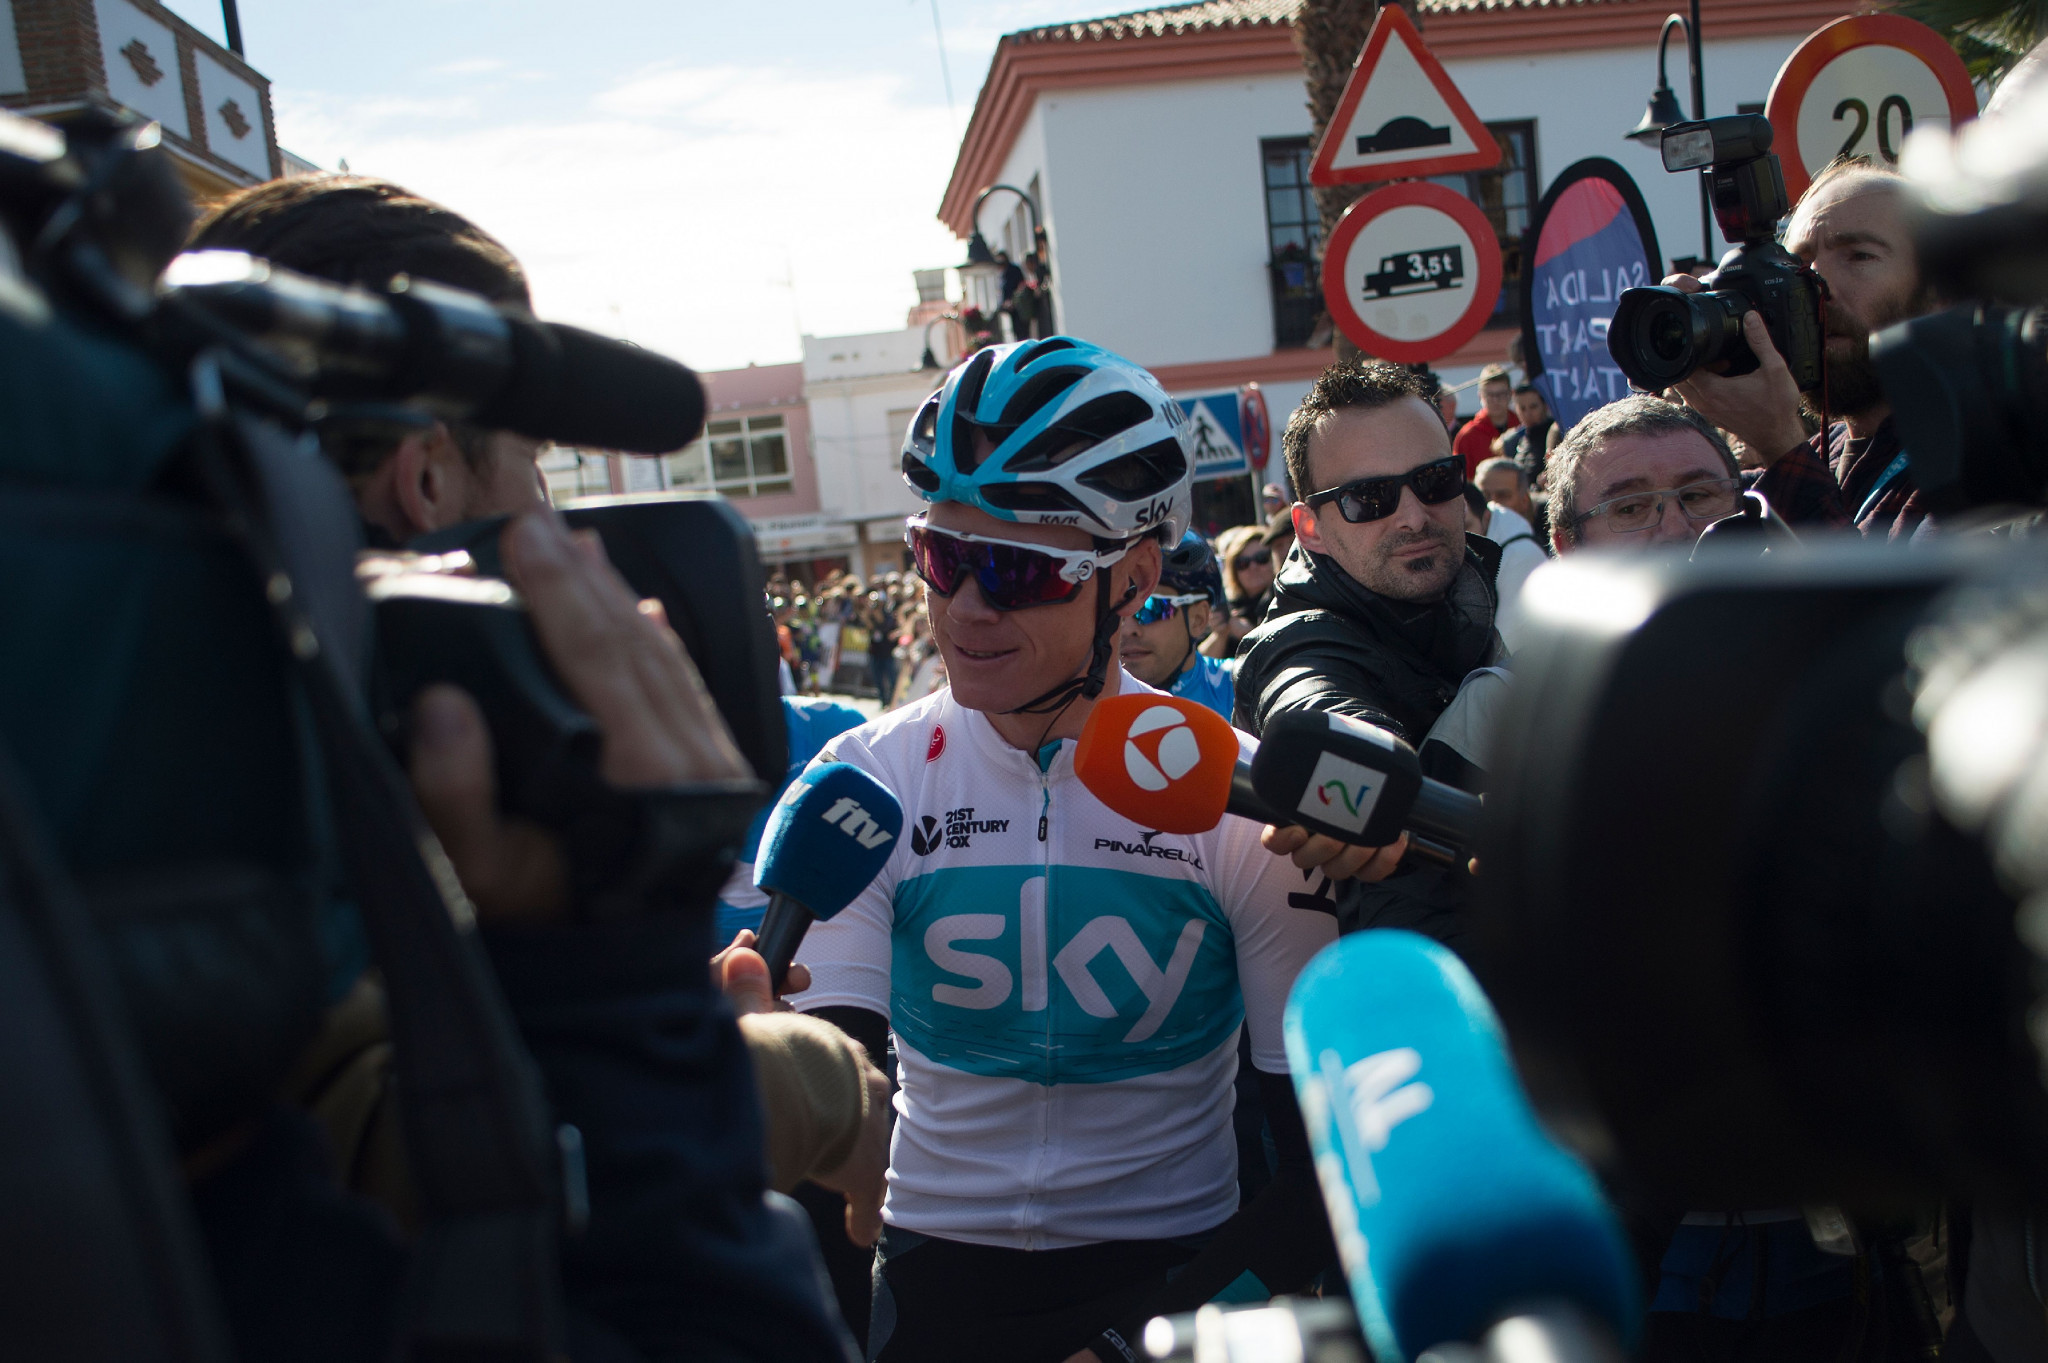 Britain's Chris Froome has continued to face questions about his salbutamol case ©Getty Images